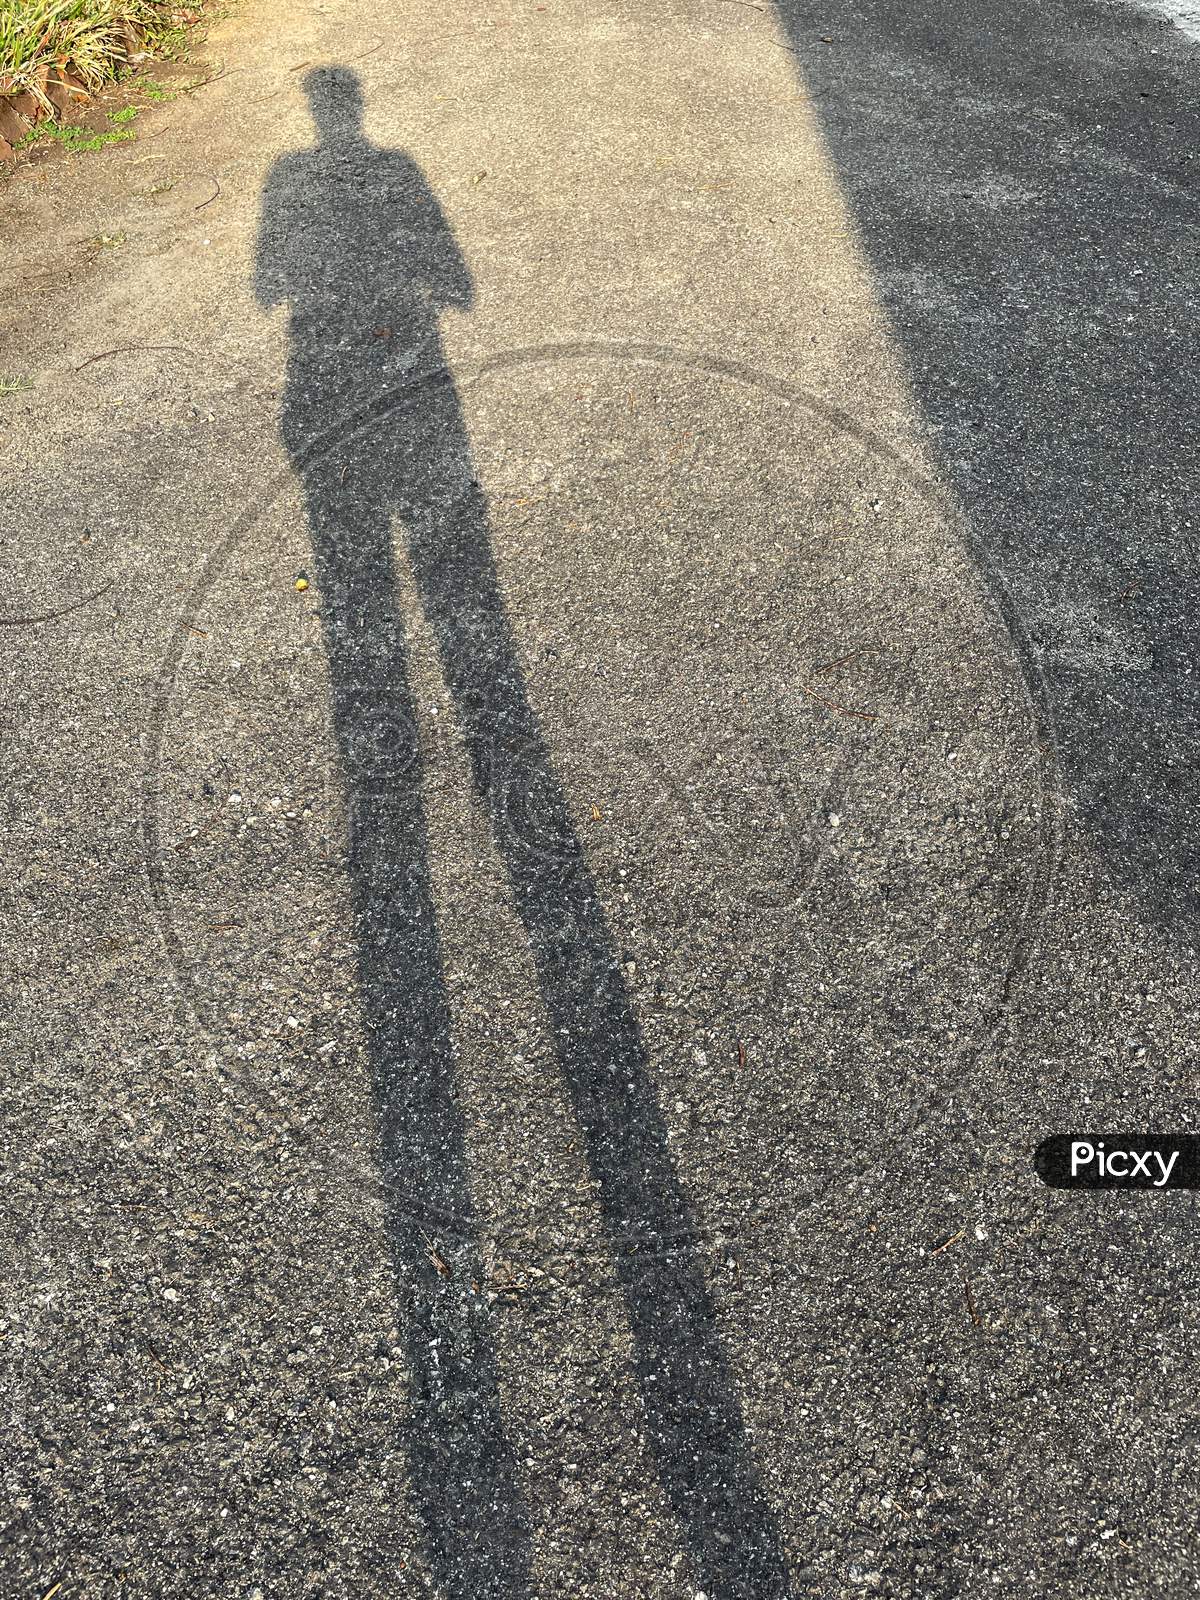 Image Of Shadow Of Human On Ground.